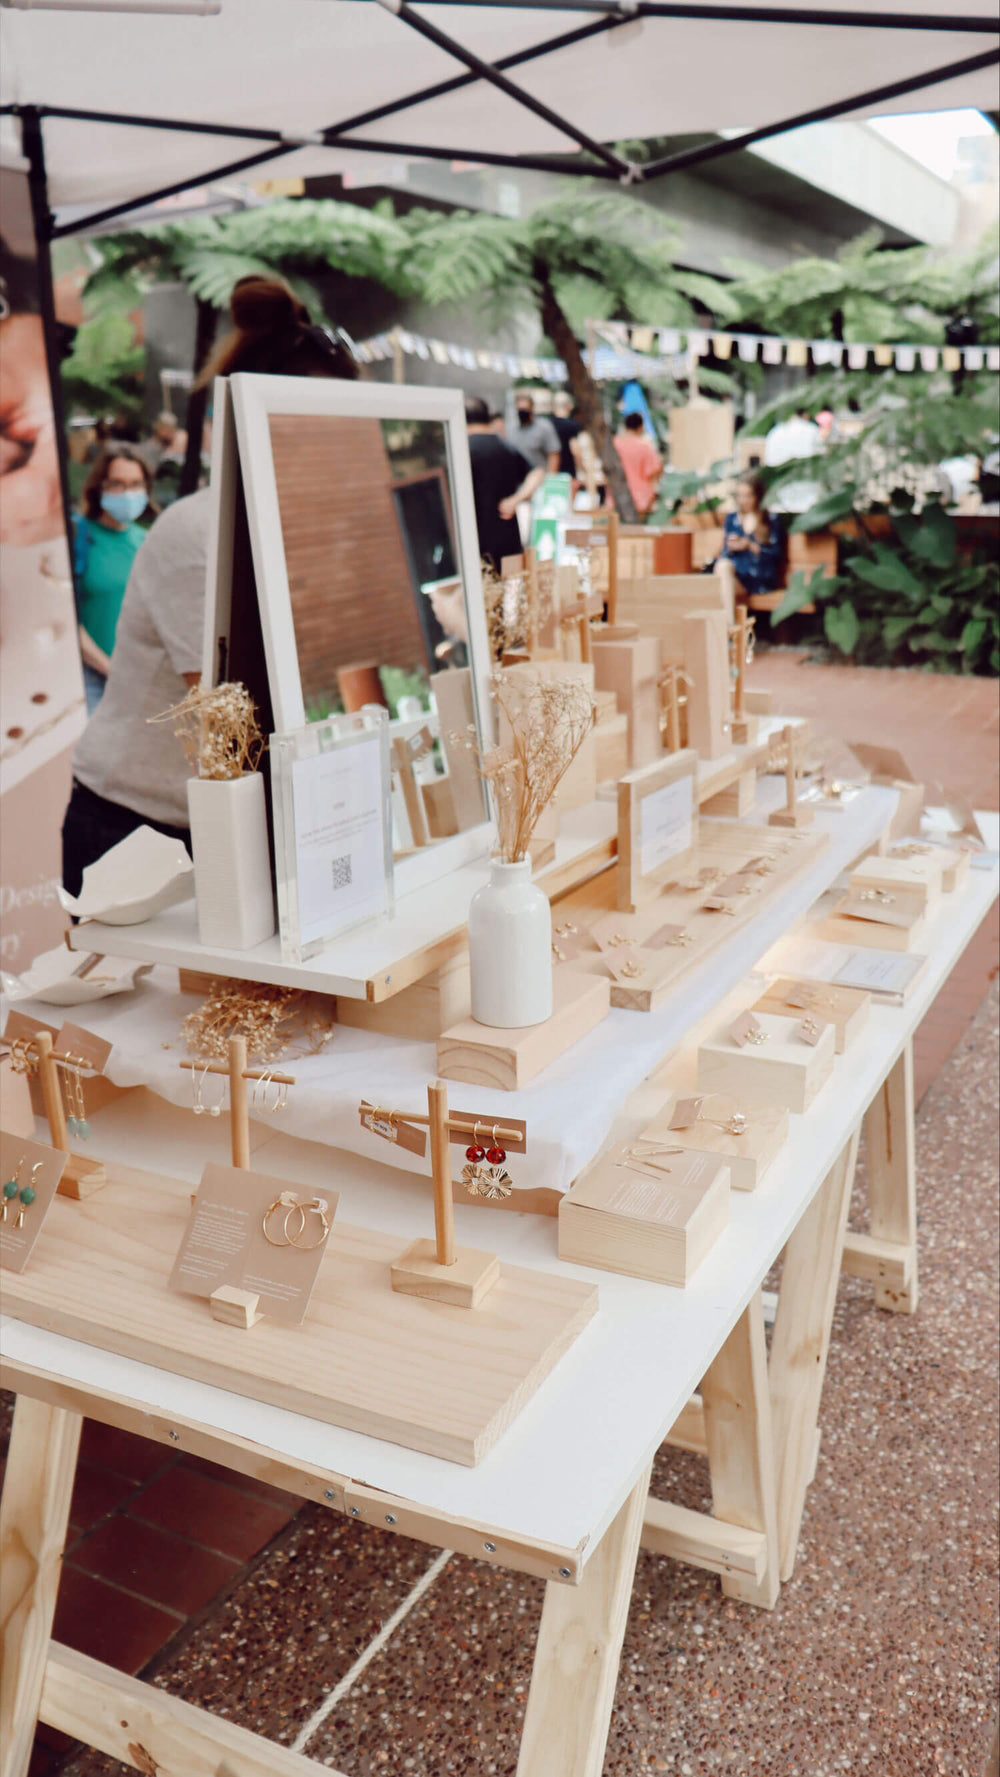 Handcrafted jewellery on display at The Market Folk creative markets in Brisbane.